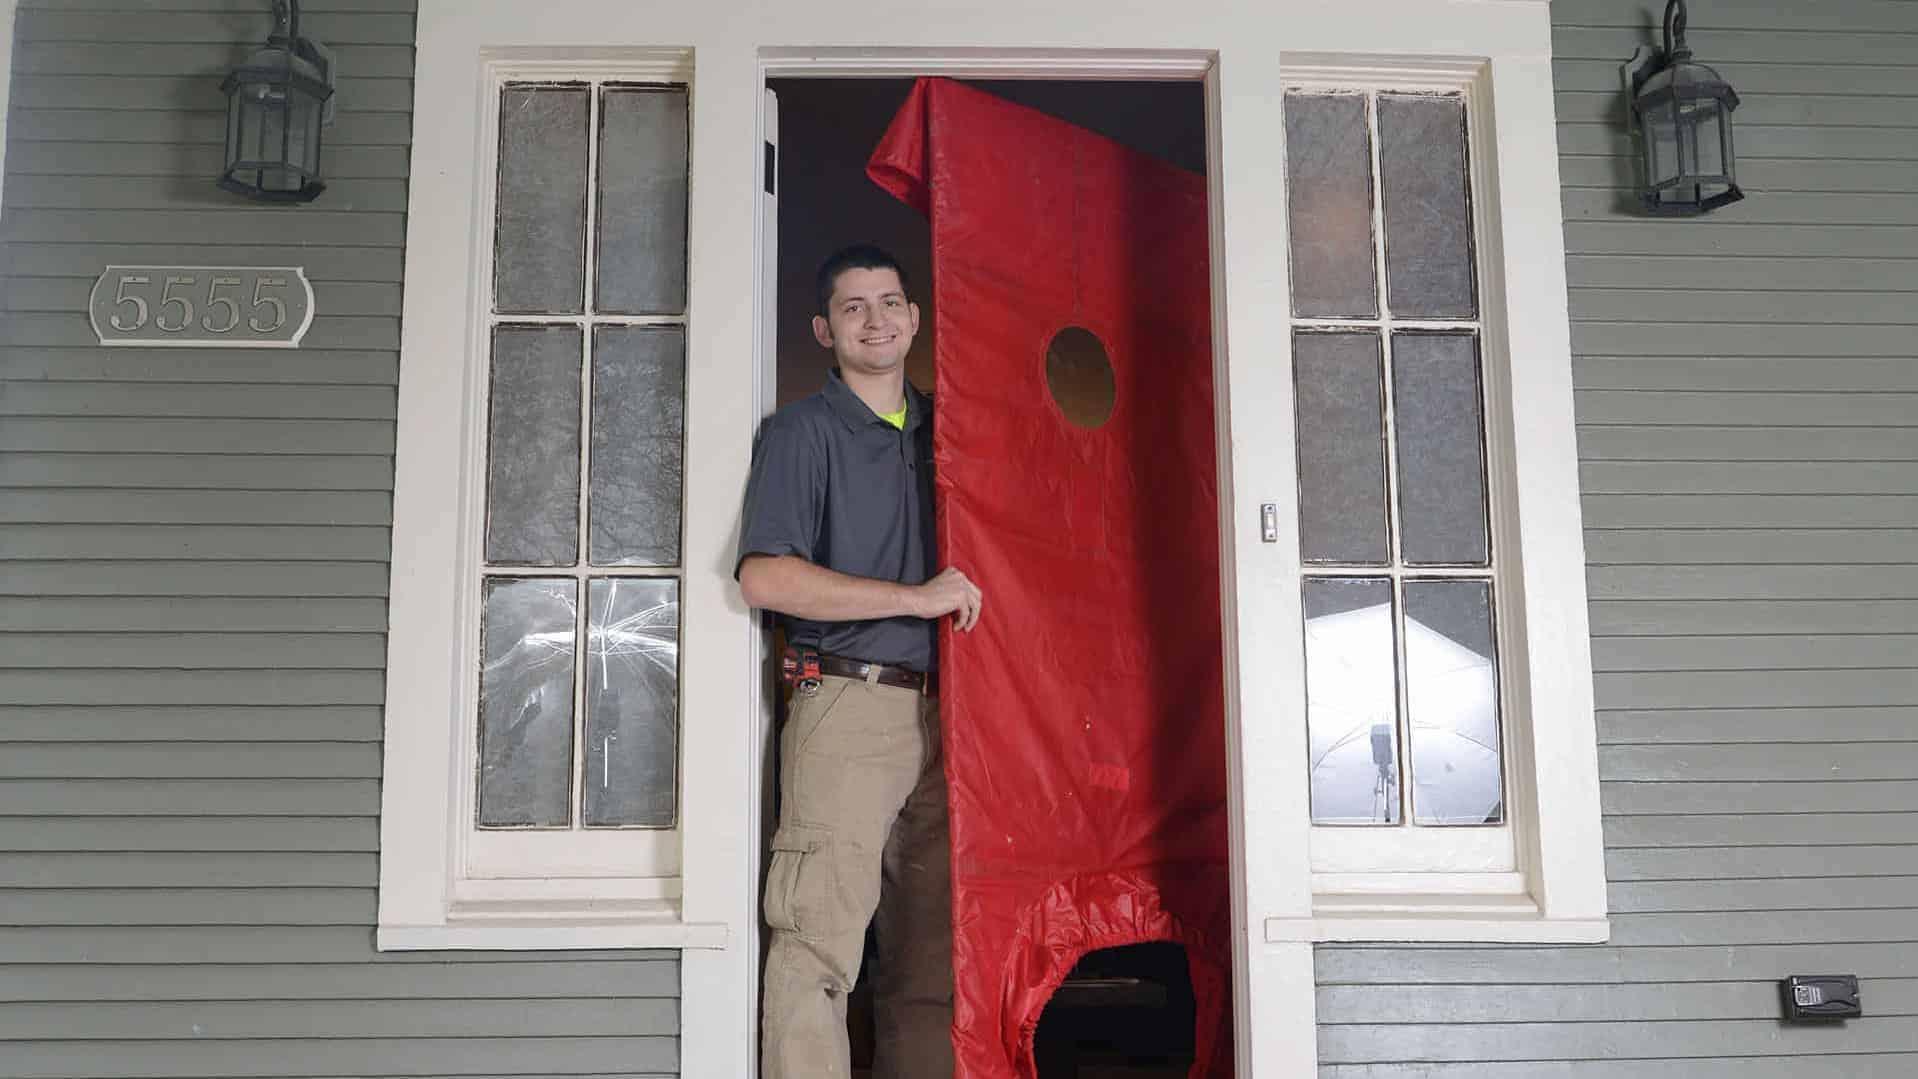 How leaky is your home? Diversified Energy offers blower door testing services to measure and identify the sources of air leakage in your home.